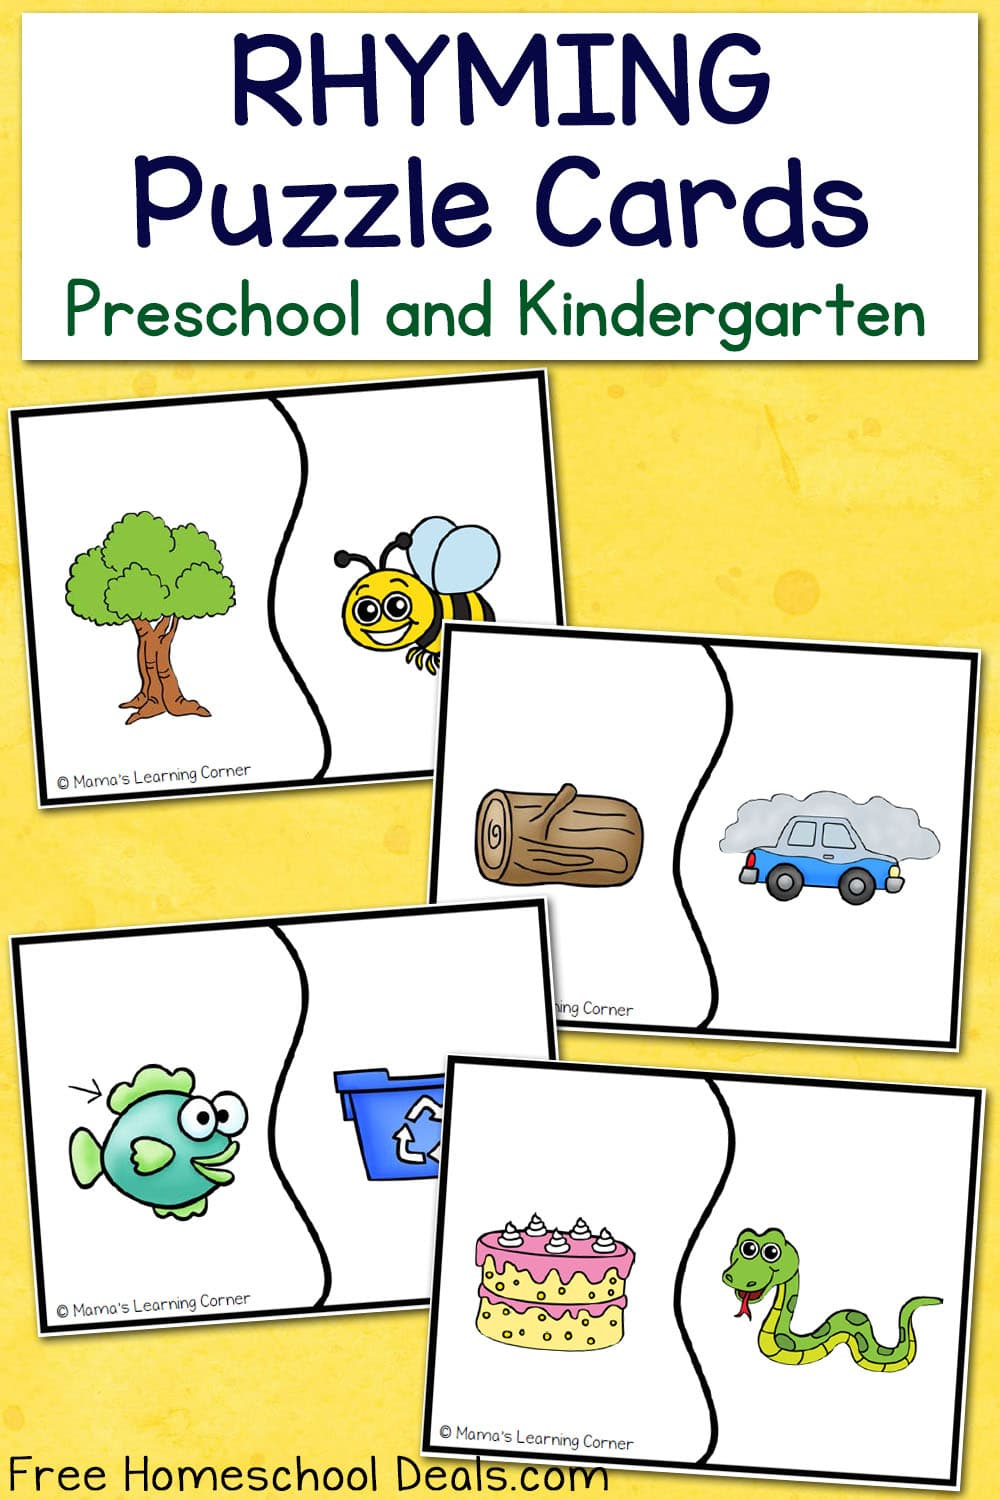 FREE RHYMING PUZZLE CARDS Instant Download Free Homeschool Deals